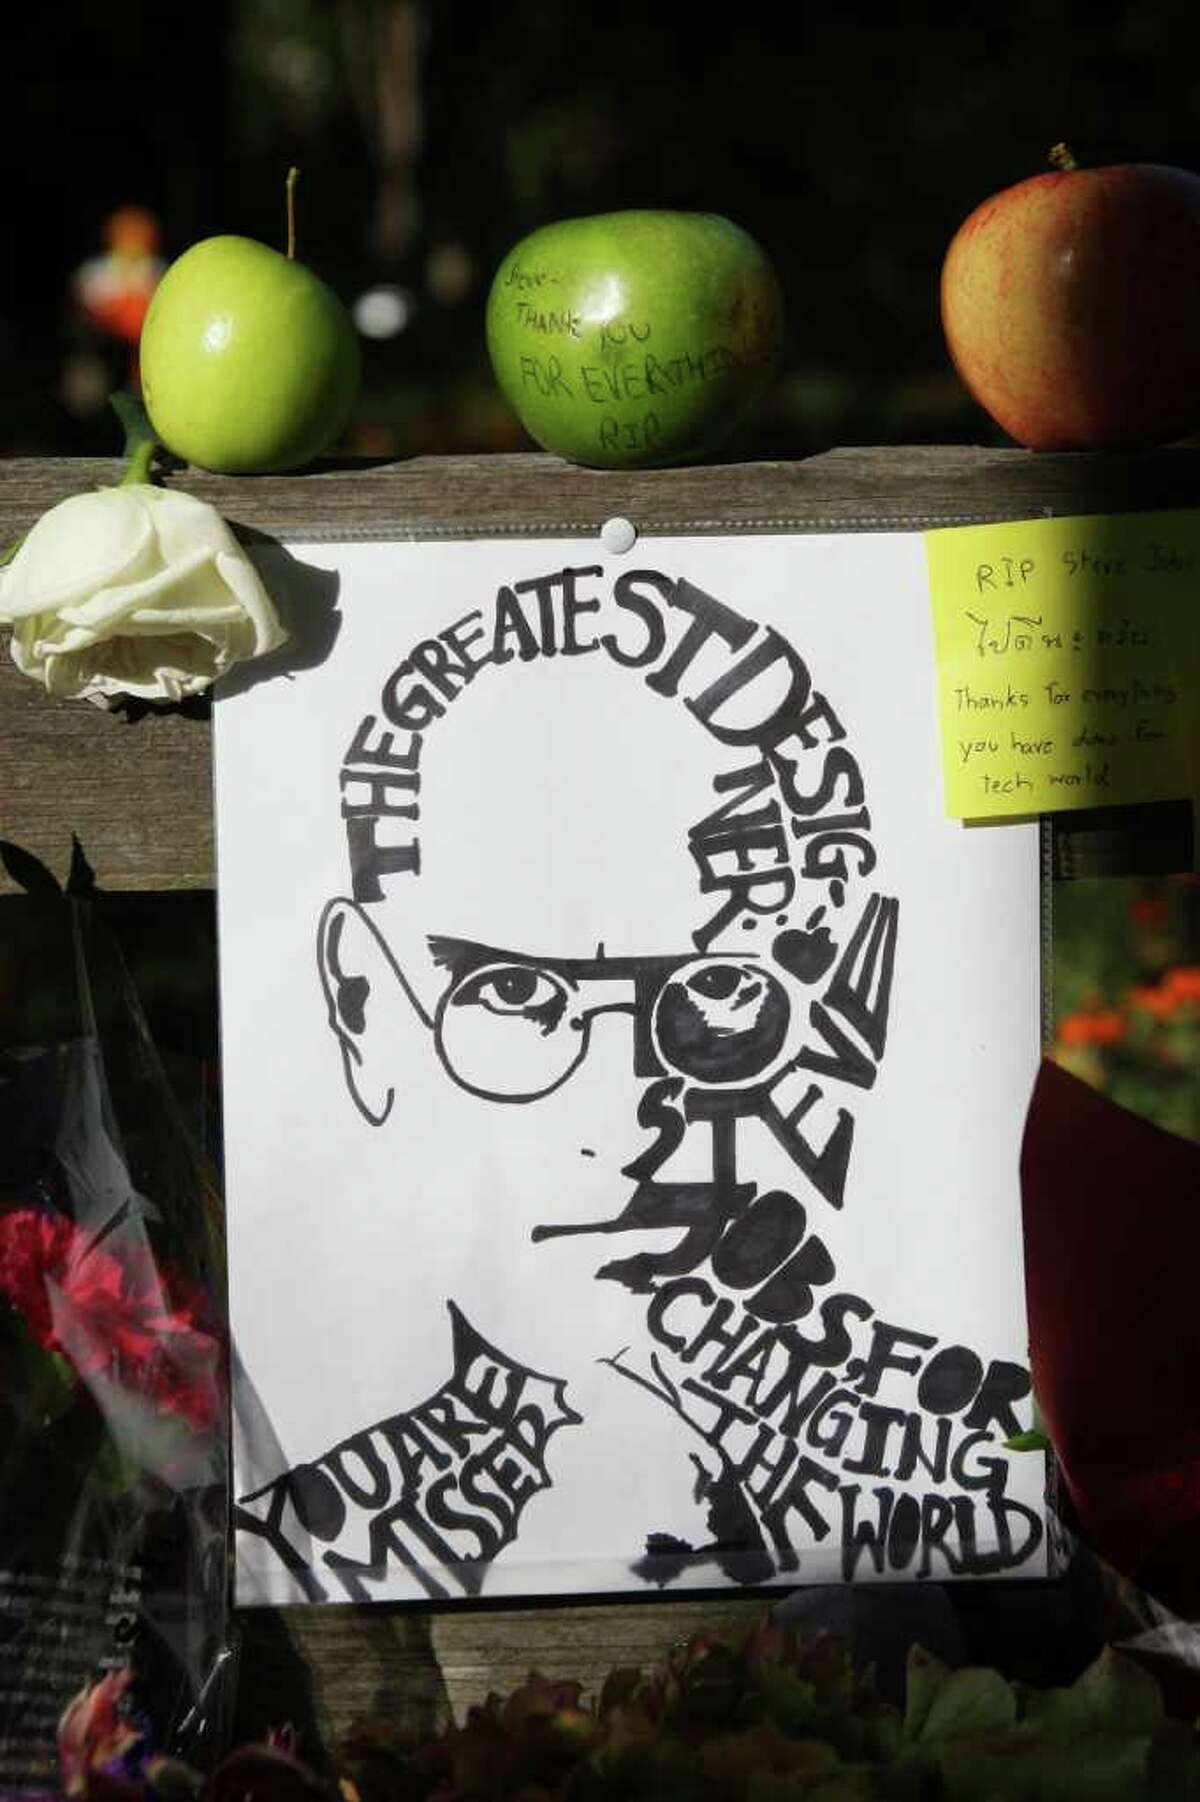 JIM GENSHEIMER : SAN JOSE MERCURY NEWS REMEMBRANCE: This display was one of many tributes left in front of Steve Jobs' home in Palo Alto, Calif., by a steady stream of admirers.